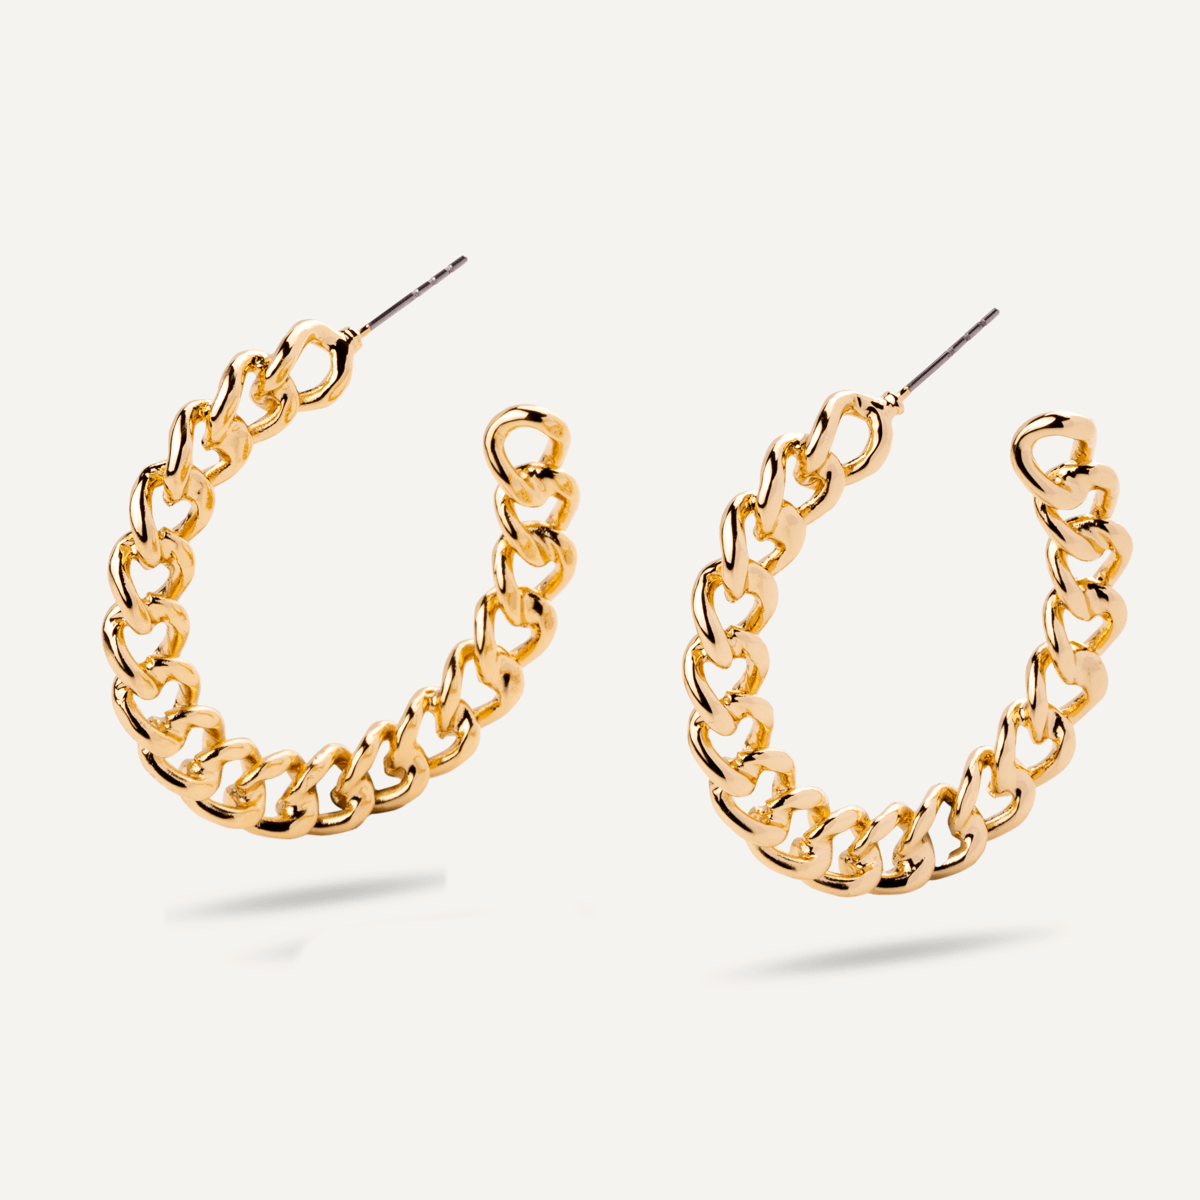 Close-up view of Eternal Narrow Curb Chain Hoop Earrings in Gold